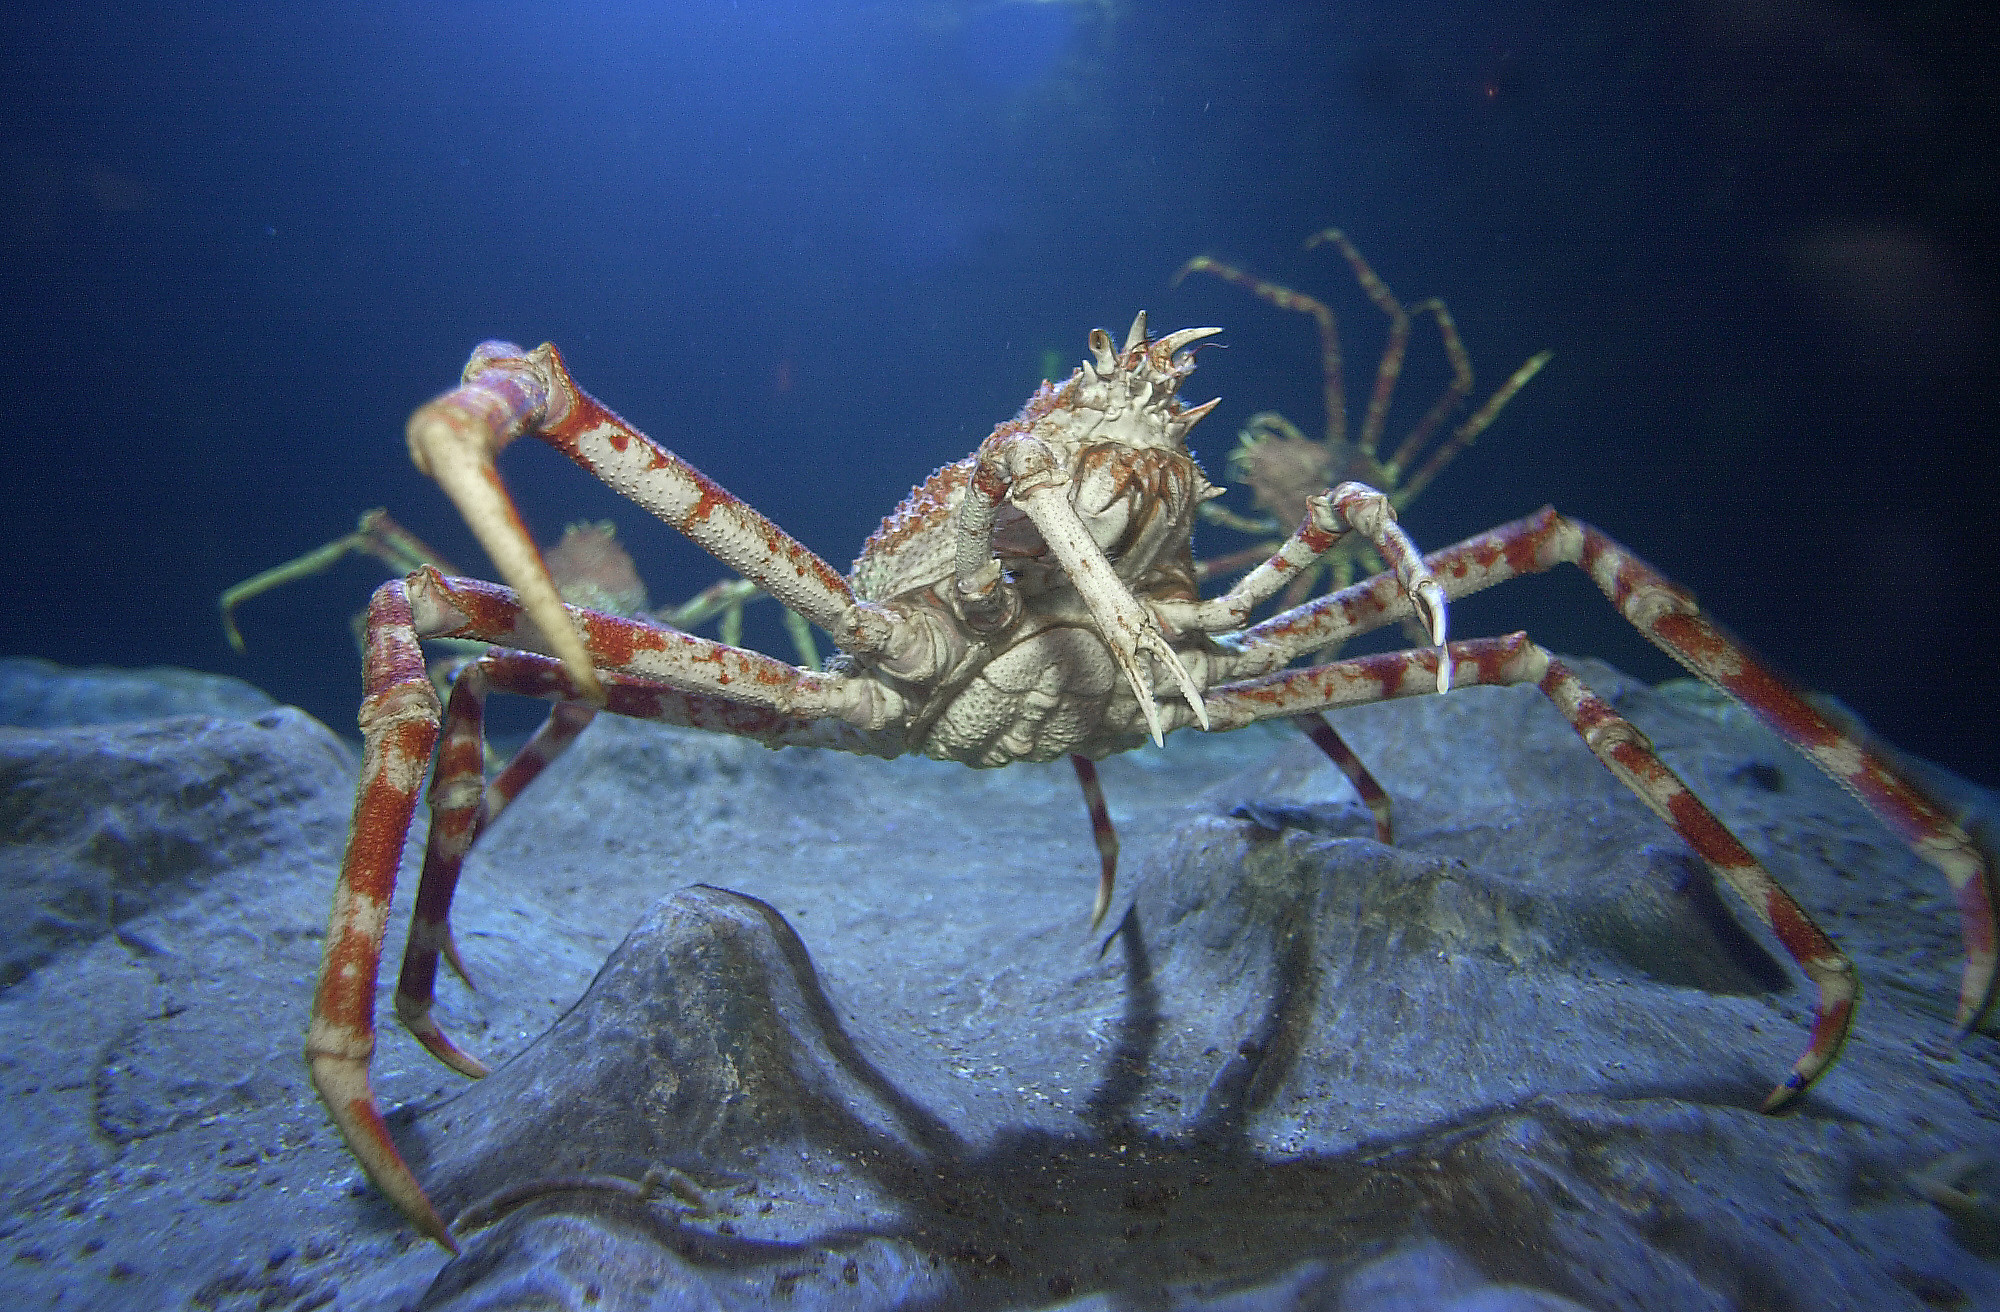 A Japanese Spider Crab